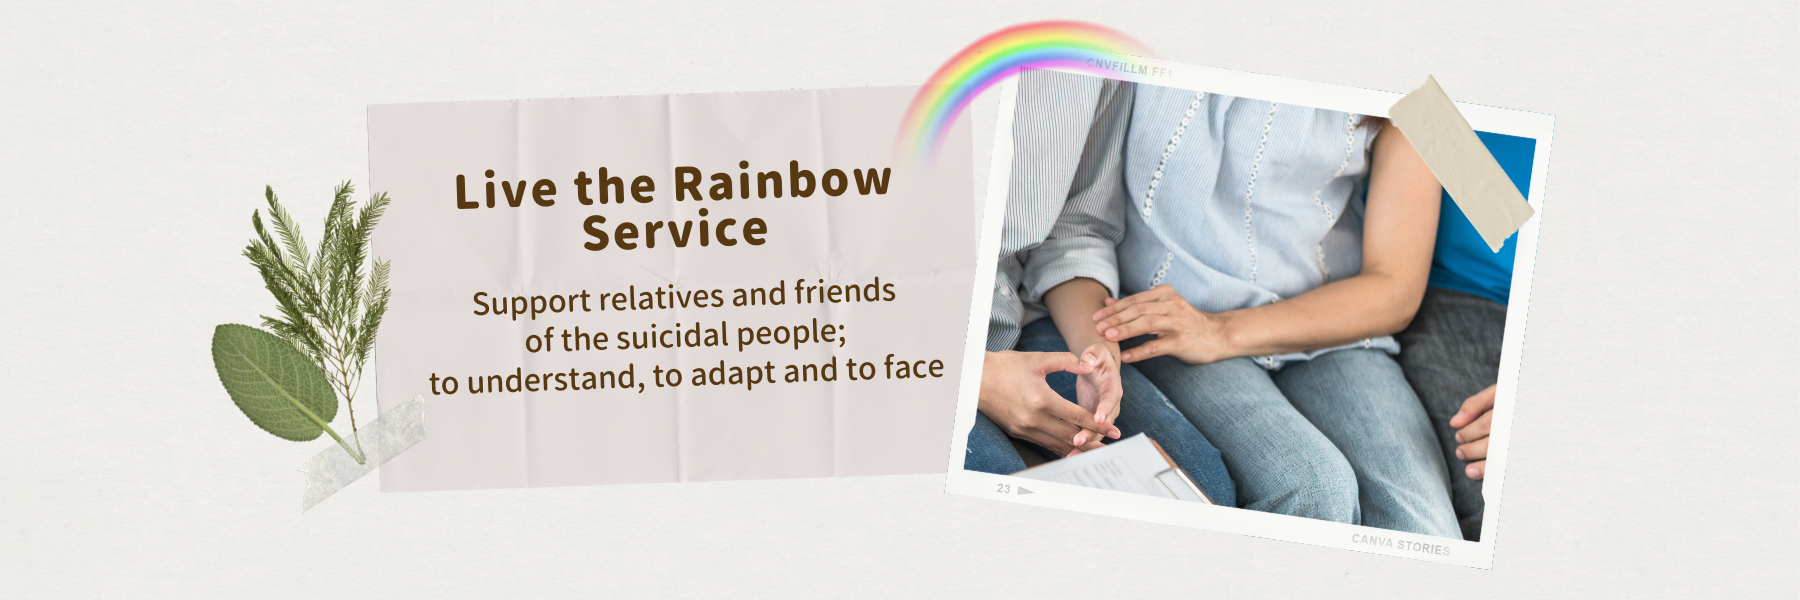 Live the Rainbow Service Banner